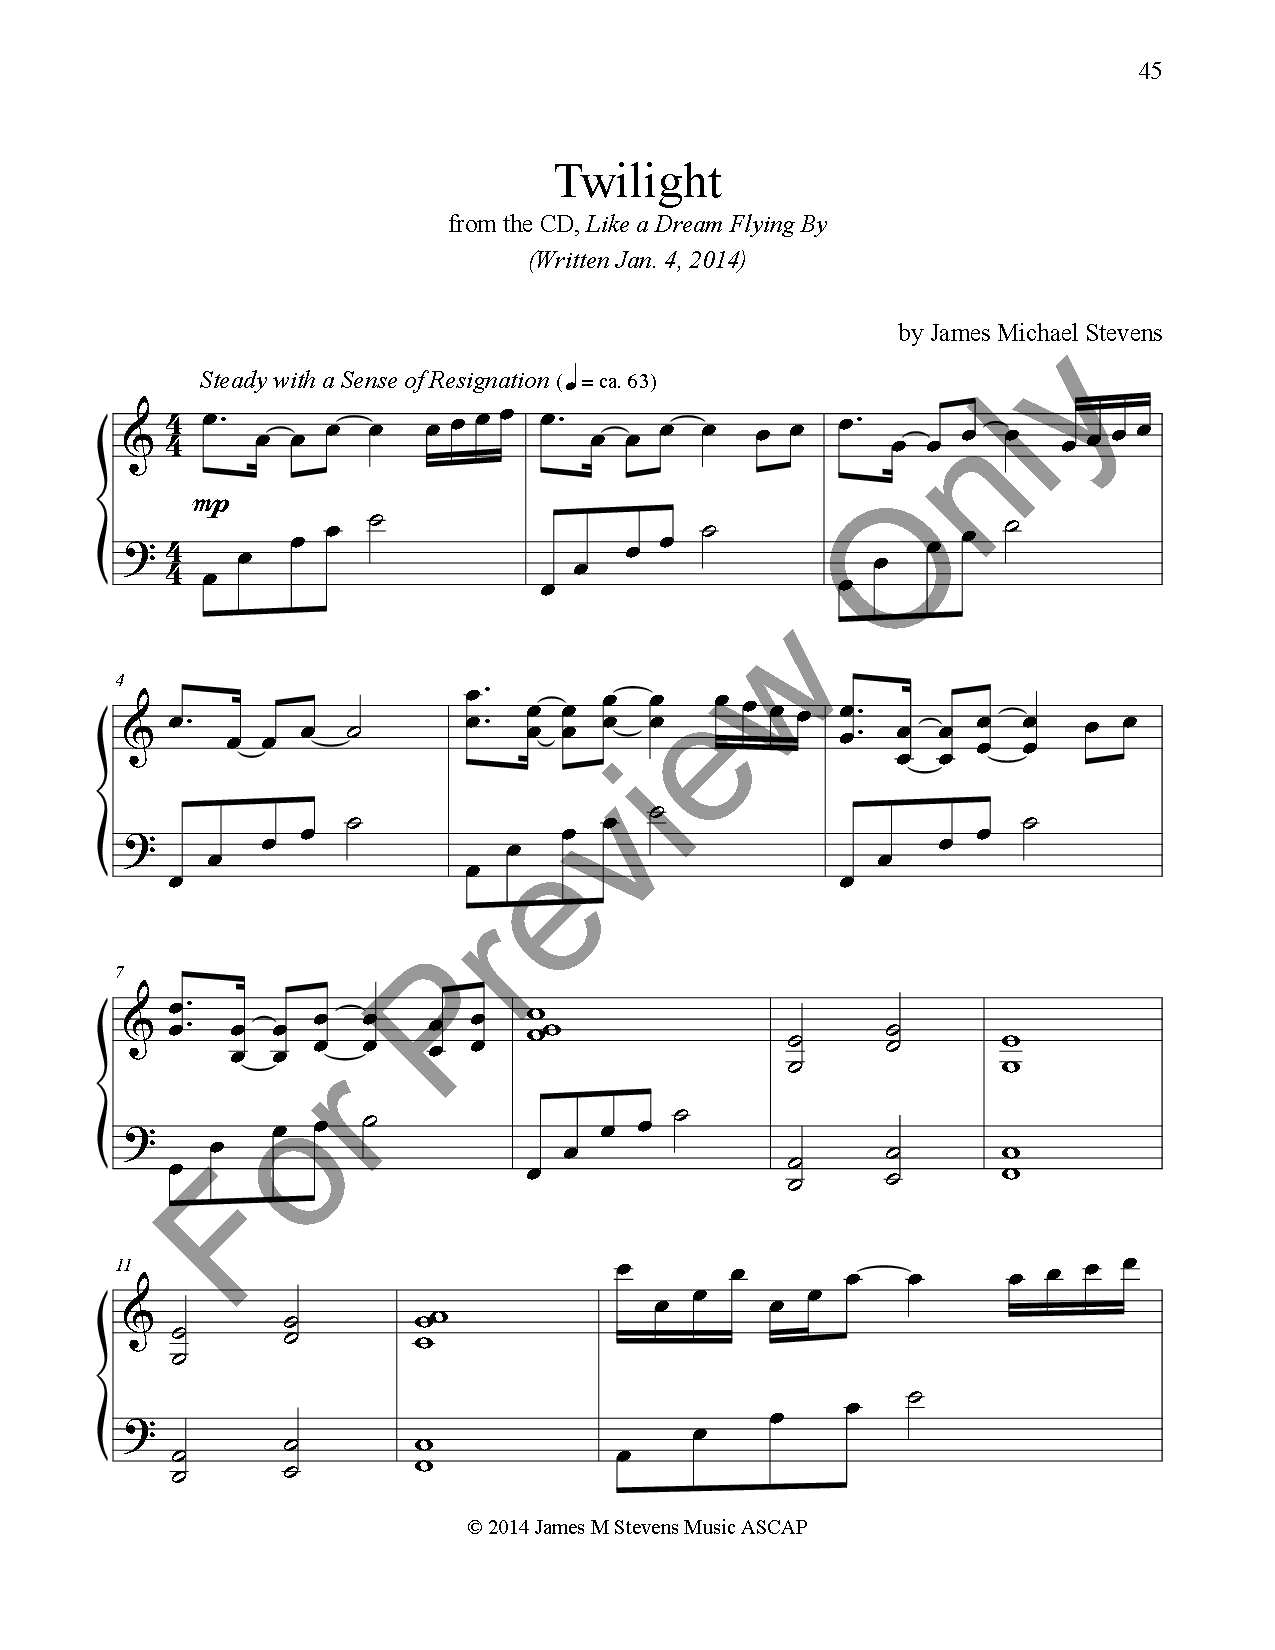 Like a Dream Flying By (Piano Book) P.O.D.